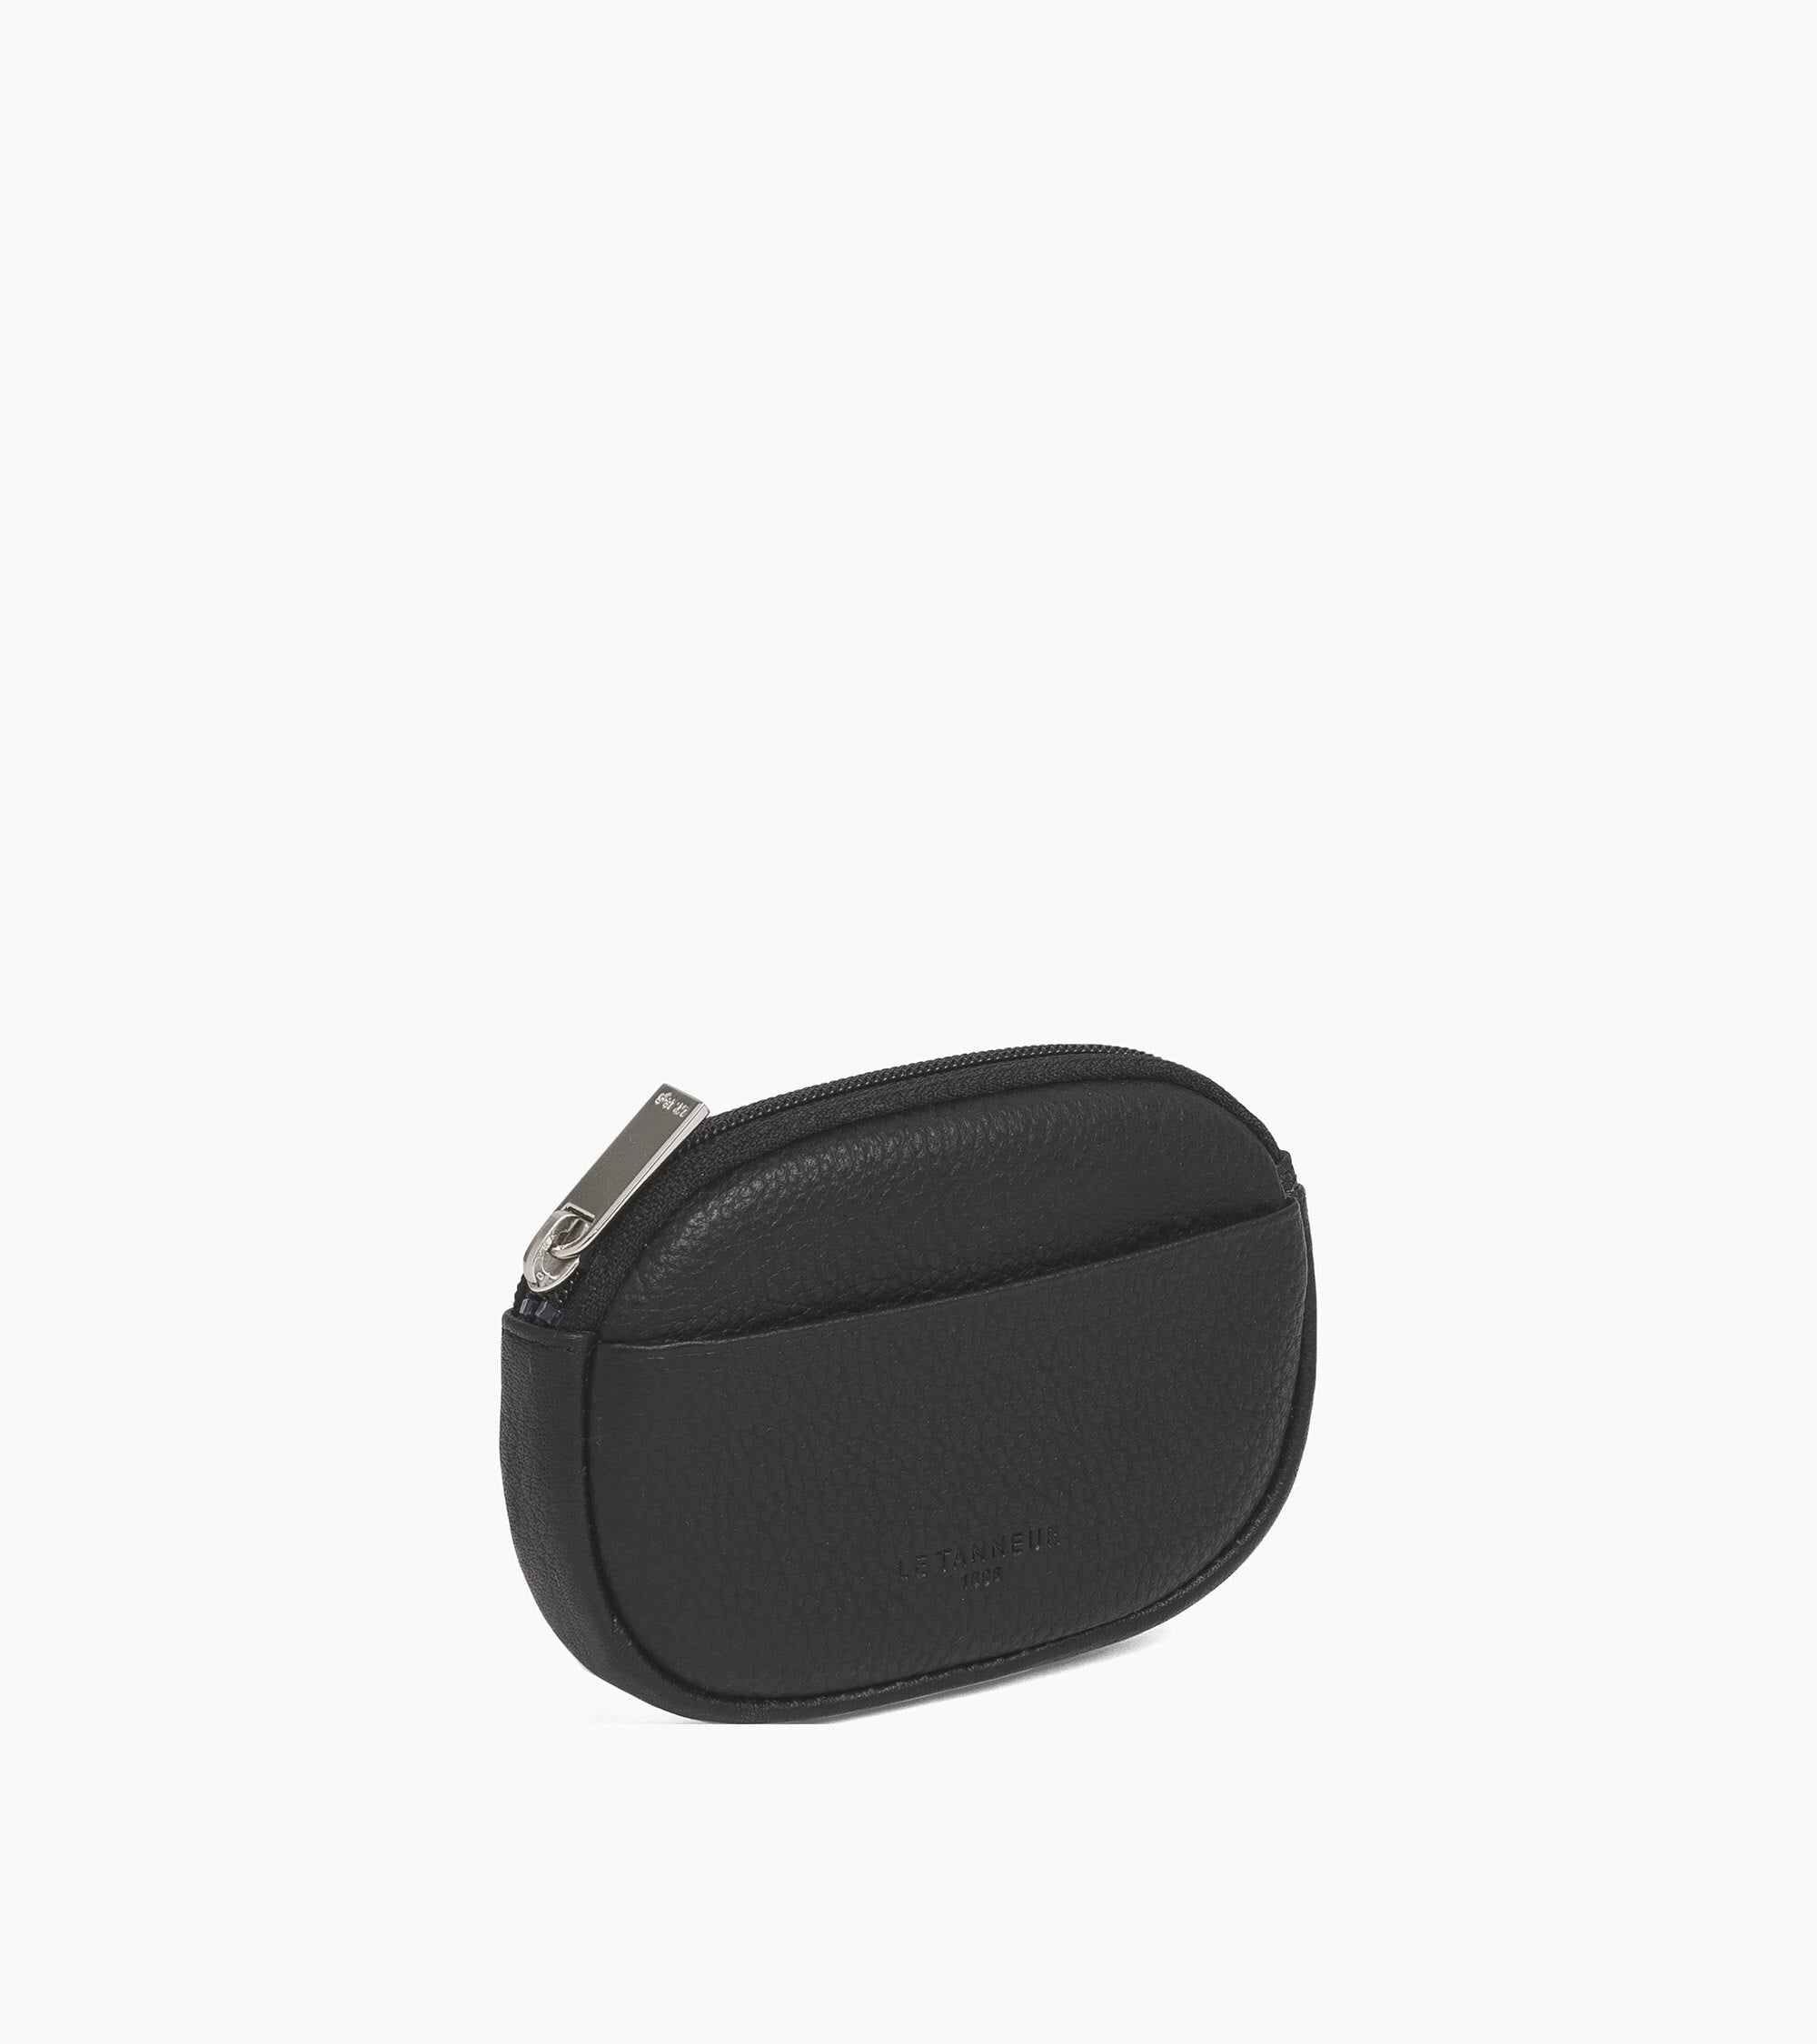 Charles zipped coin purse in grained leather